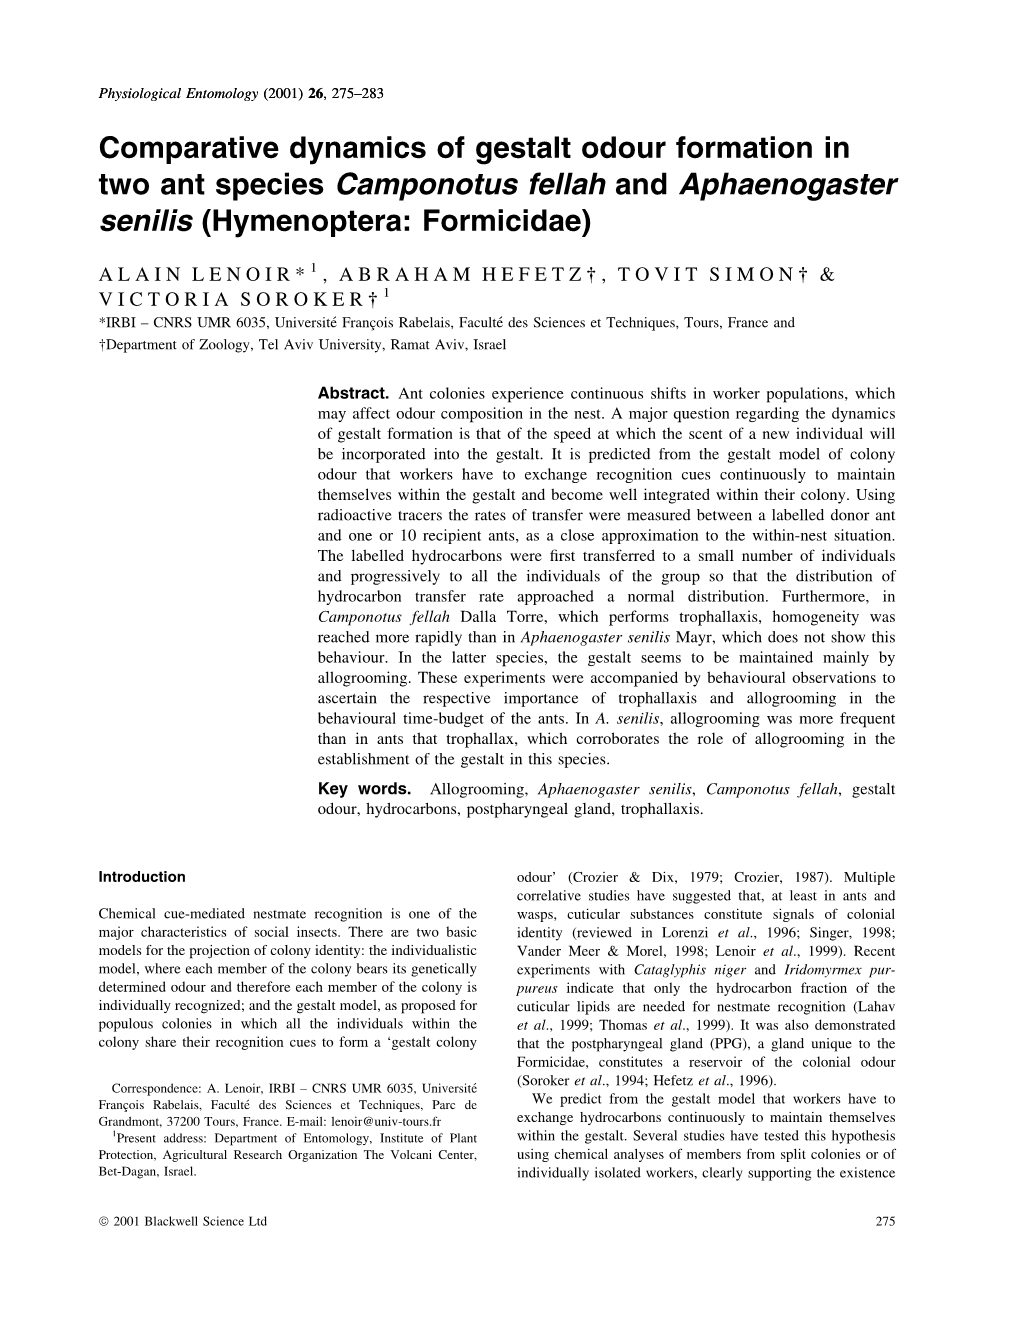 Comparative Dynamics of Gestalt Odour Formation in Two Ant Species Camponotus Fellah and Aphaenogaster Senilis (Hymenoptera: Formicidae)